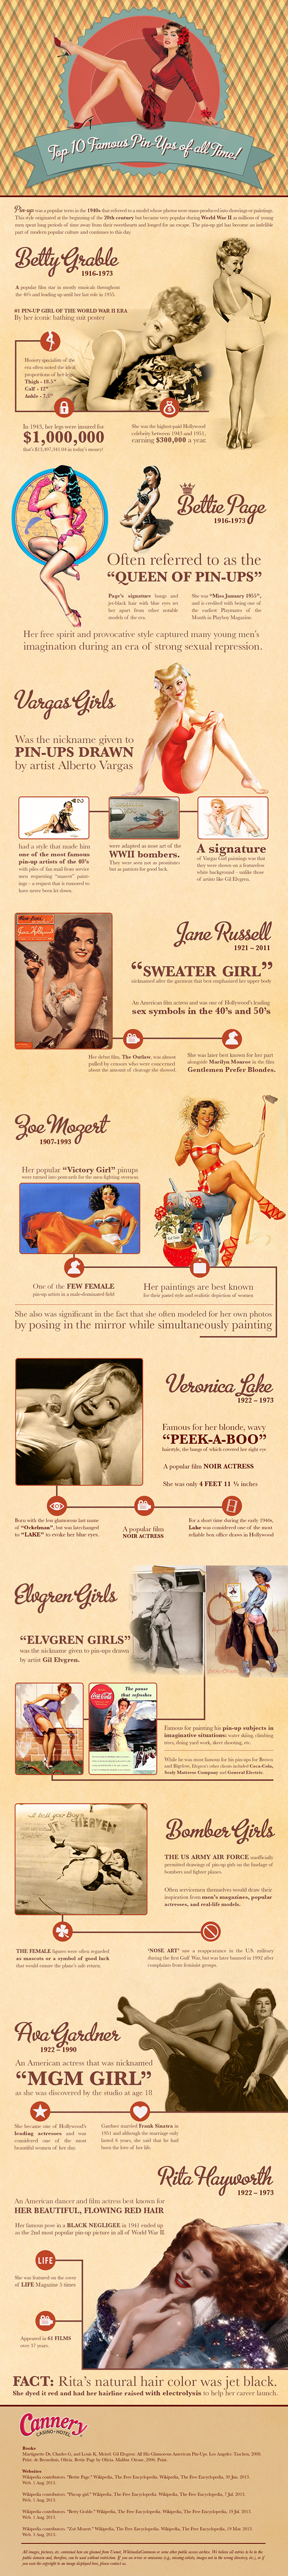 Top 10 Famous Pin-Ups of all Time!